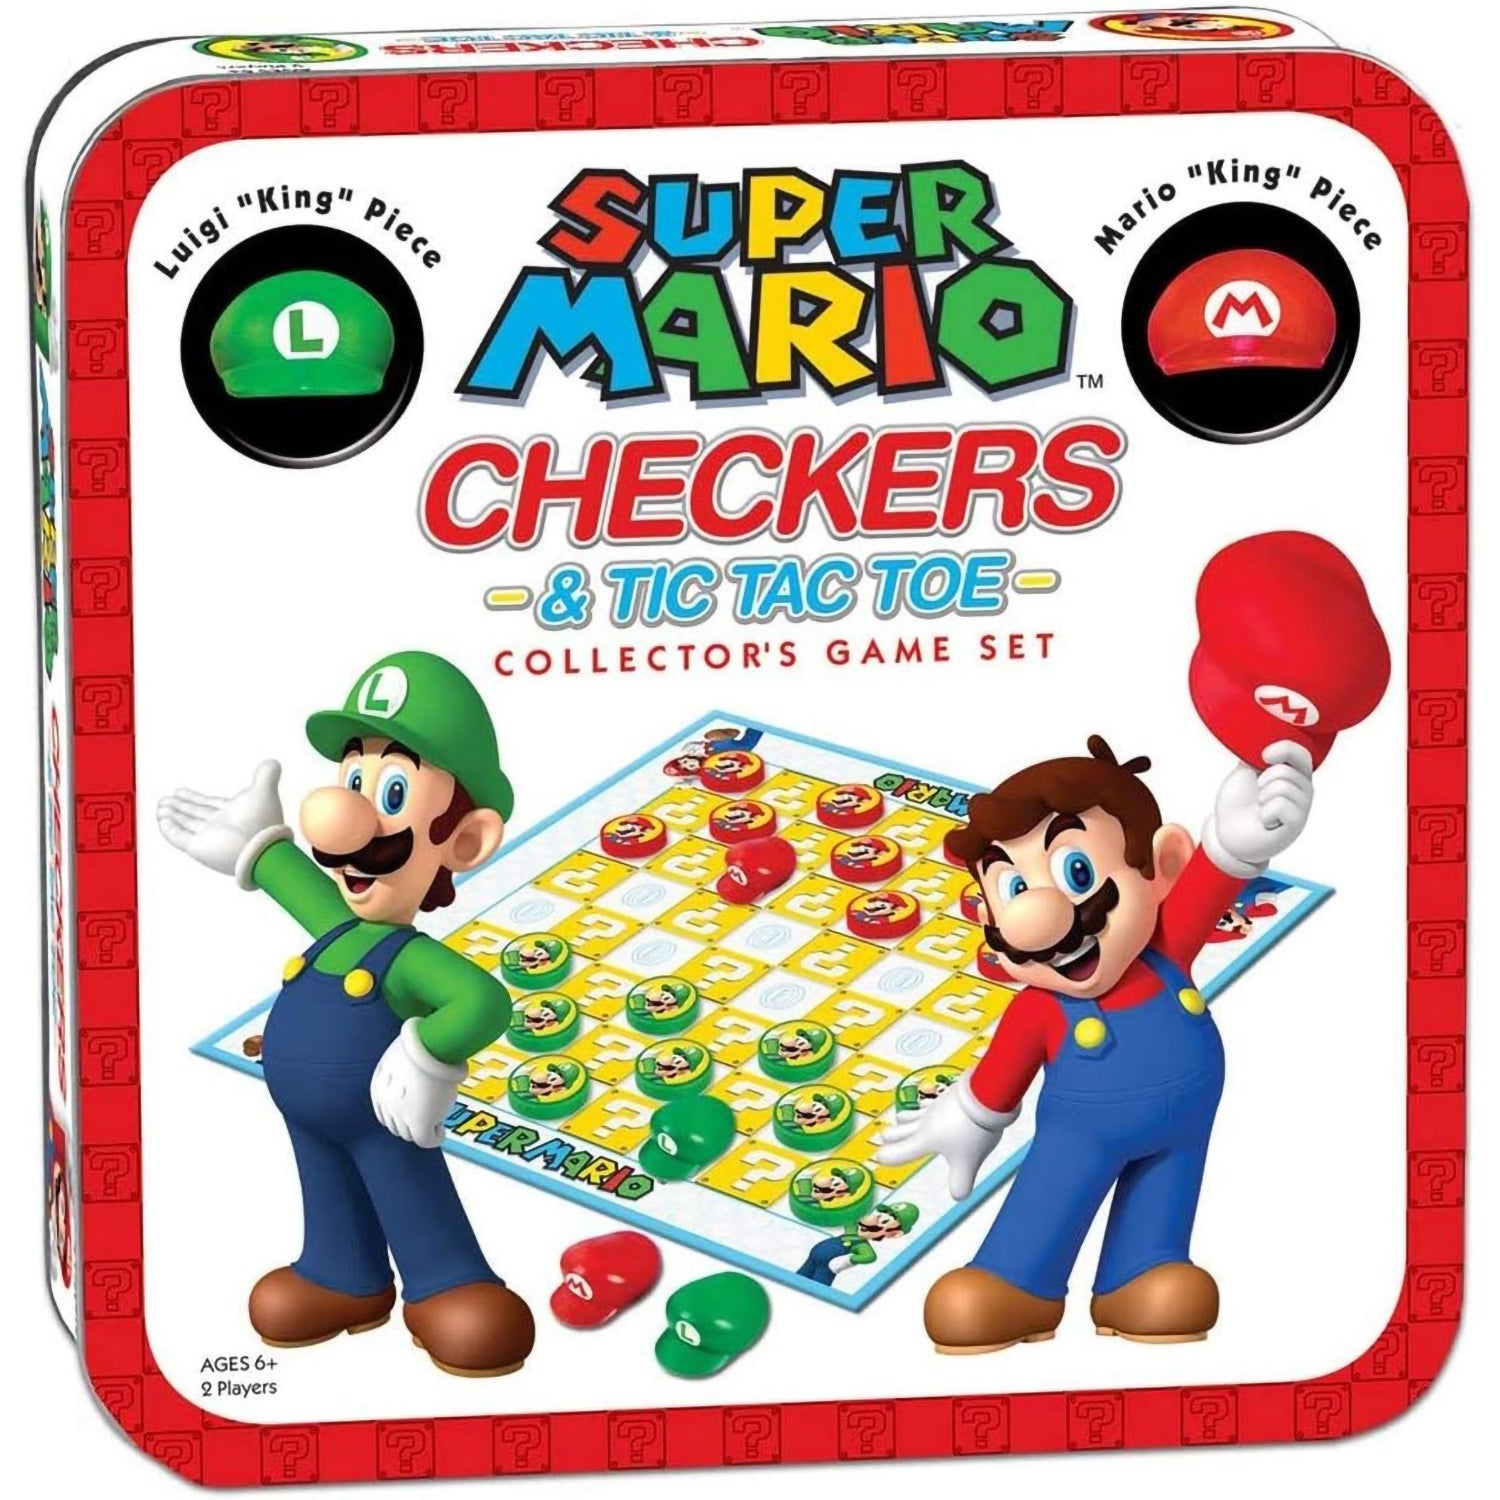 Super Mario Checkers and Tic Tac Toe Collector's Game Set